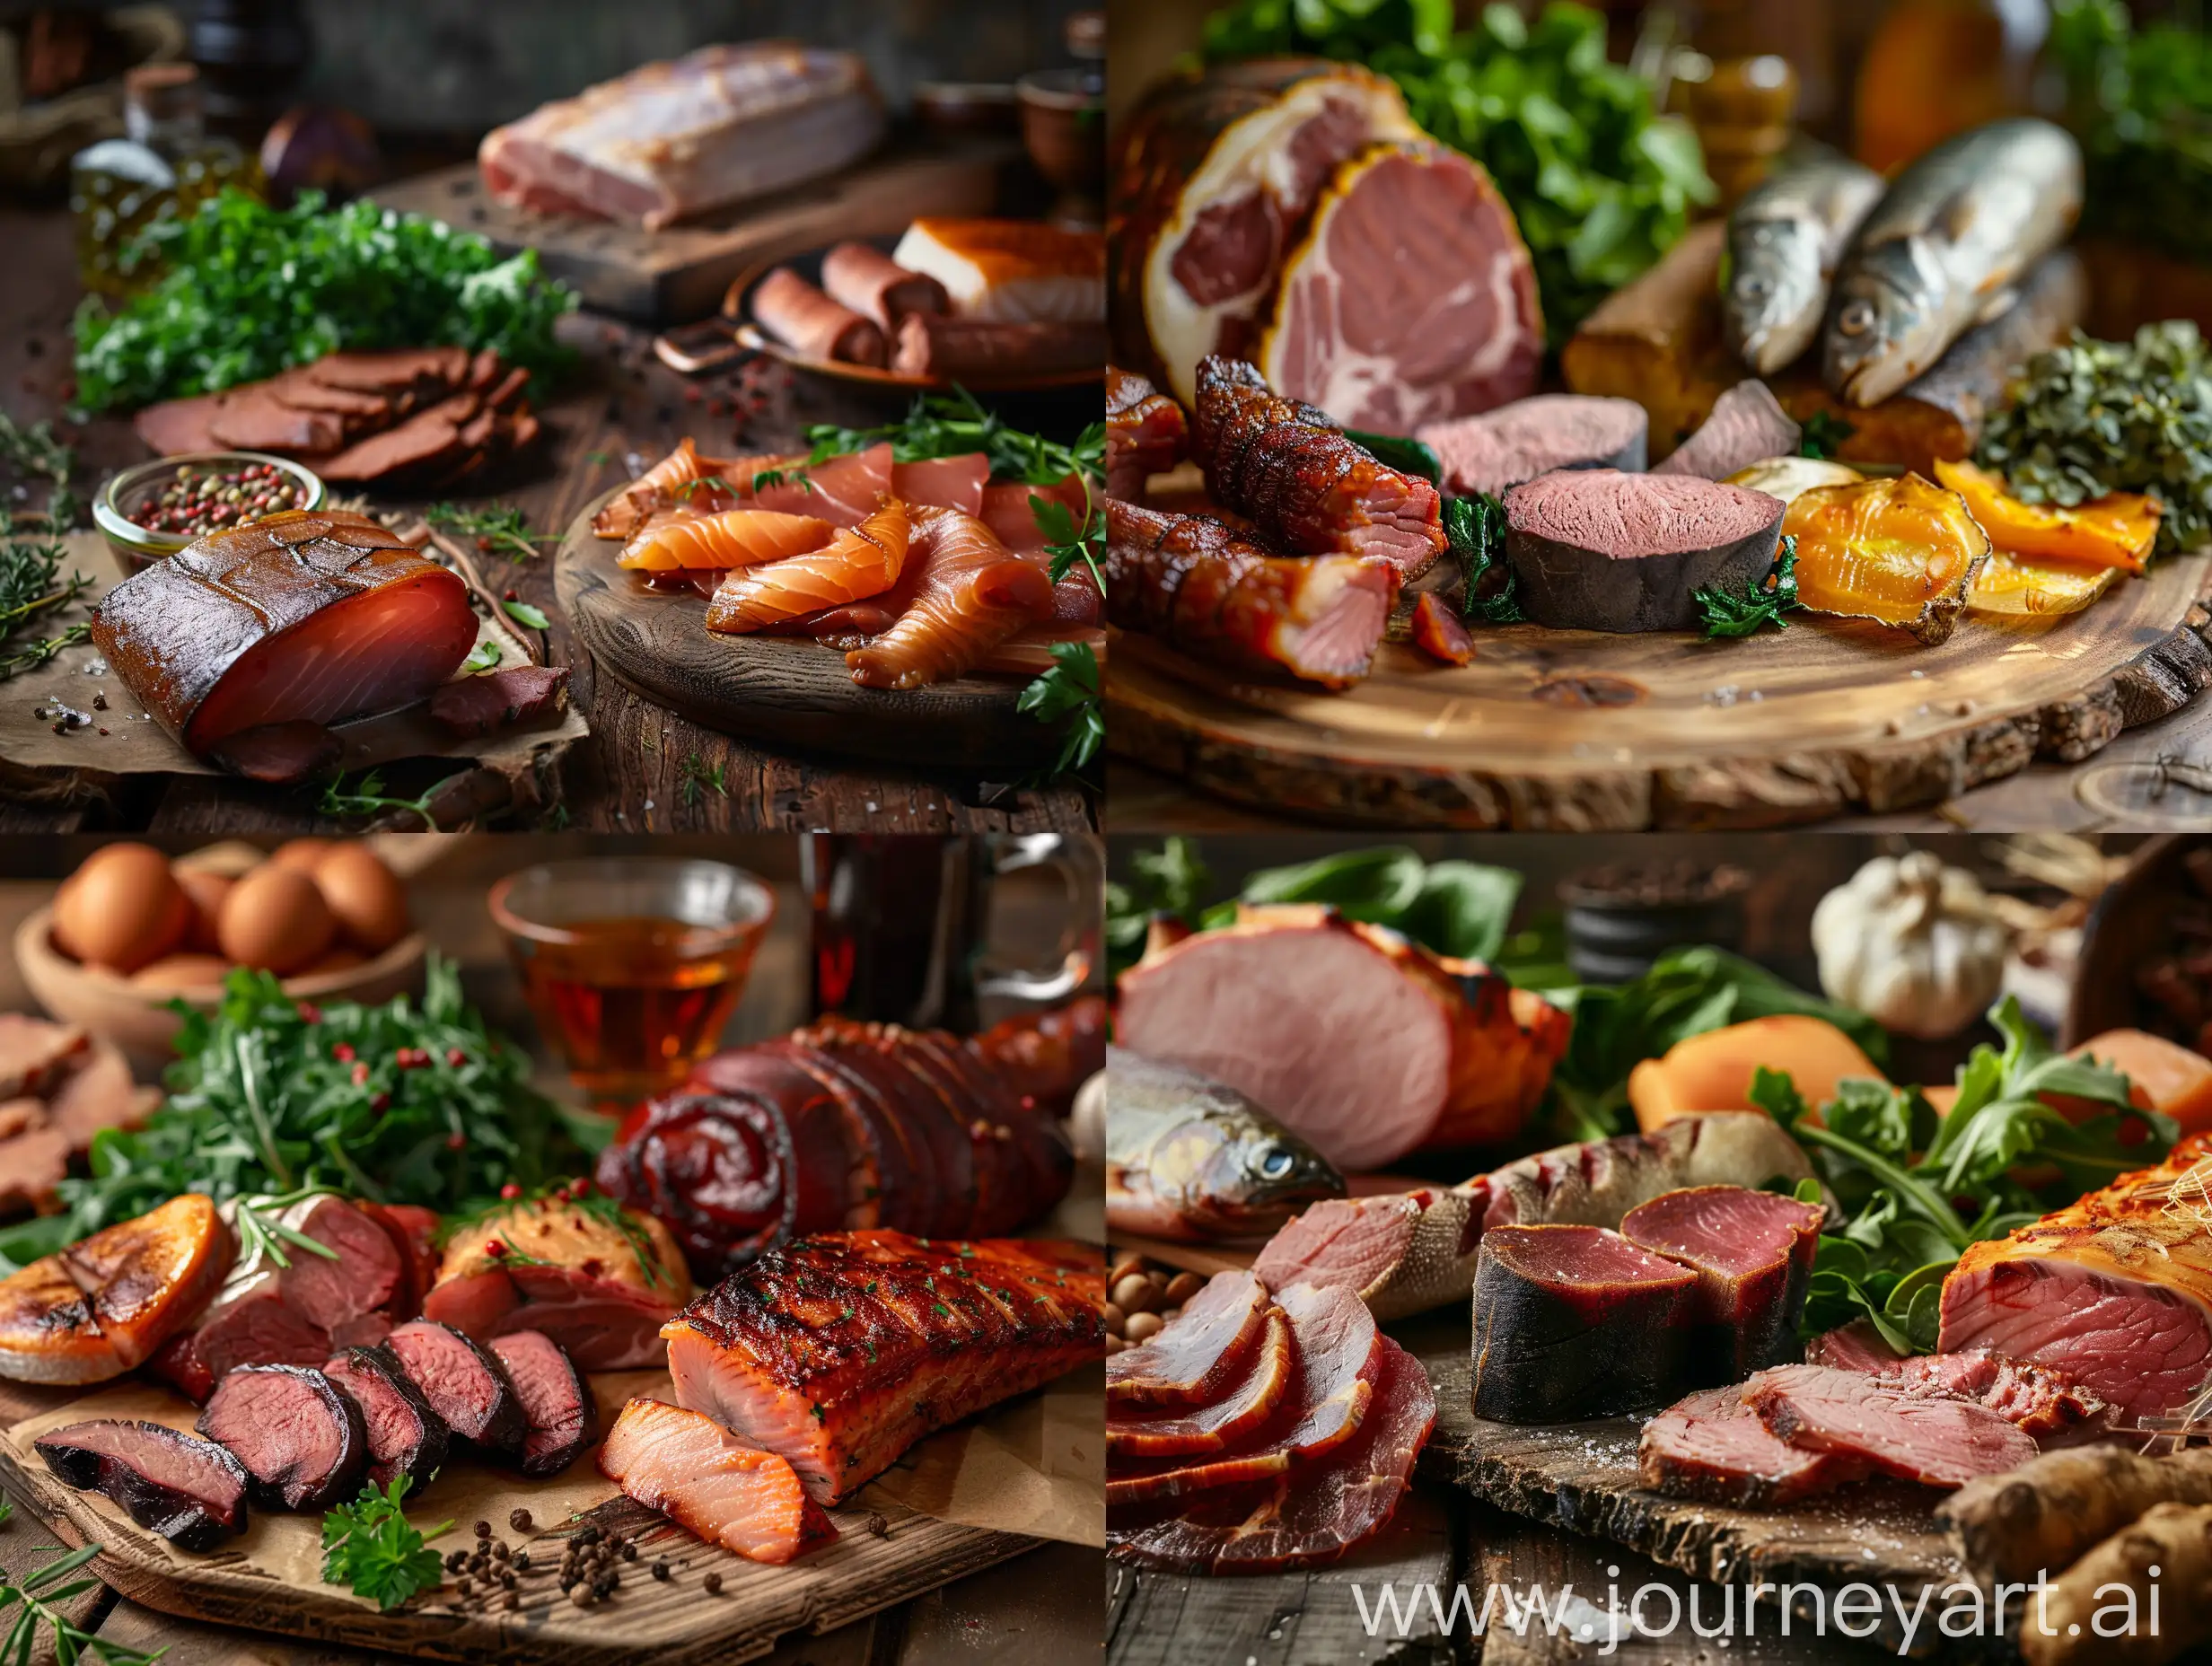 Homemade-Smoked-Products-on-Rustic-Table-with-Fresh-Greens-Photorealistic-CloseUp